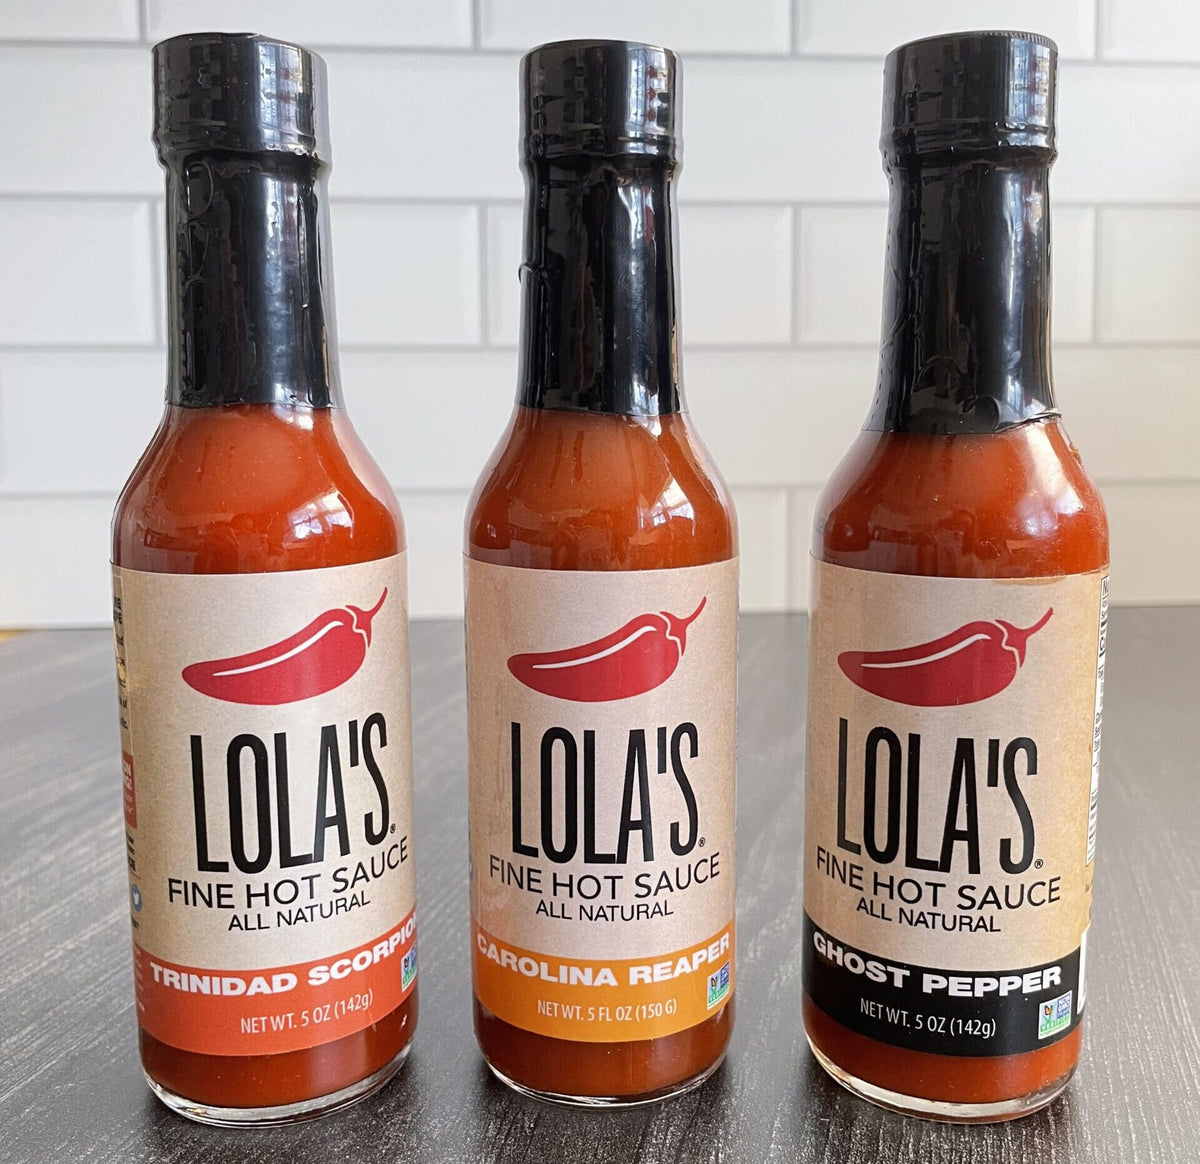 Lola's "Three Hit Wonders" Hot Sauce 3-Pack: Bottles of all-natural, spicy hot sauce - Trinidad Scorpion, Ghost Pepper, and Carolina Reaper.